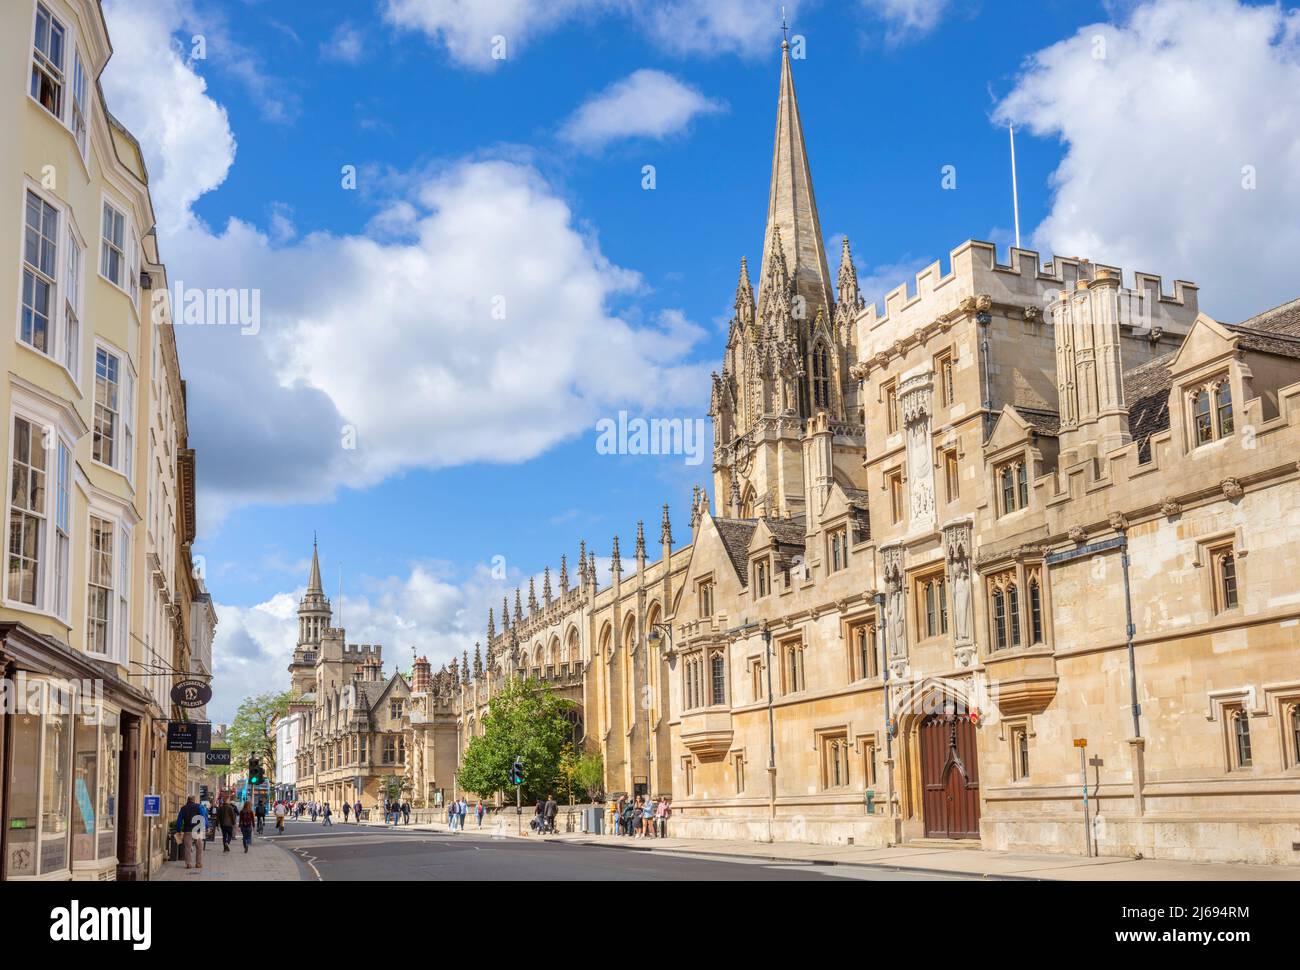 All Souls College Oxford and Tower of the University Church of St. Mary the Virgin, Oxford, Oxfordshire, England, United Kingdom Stock Photo